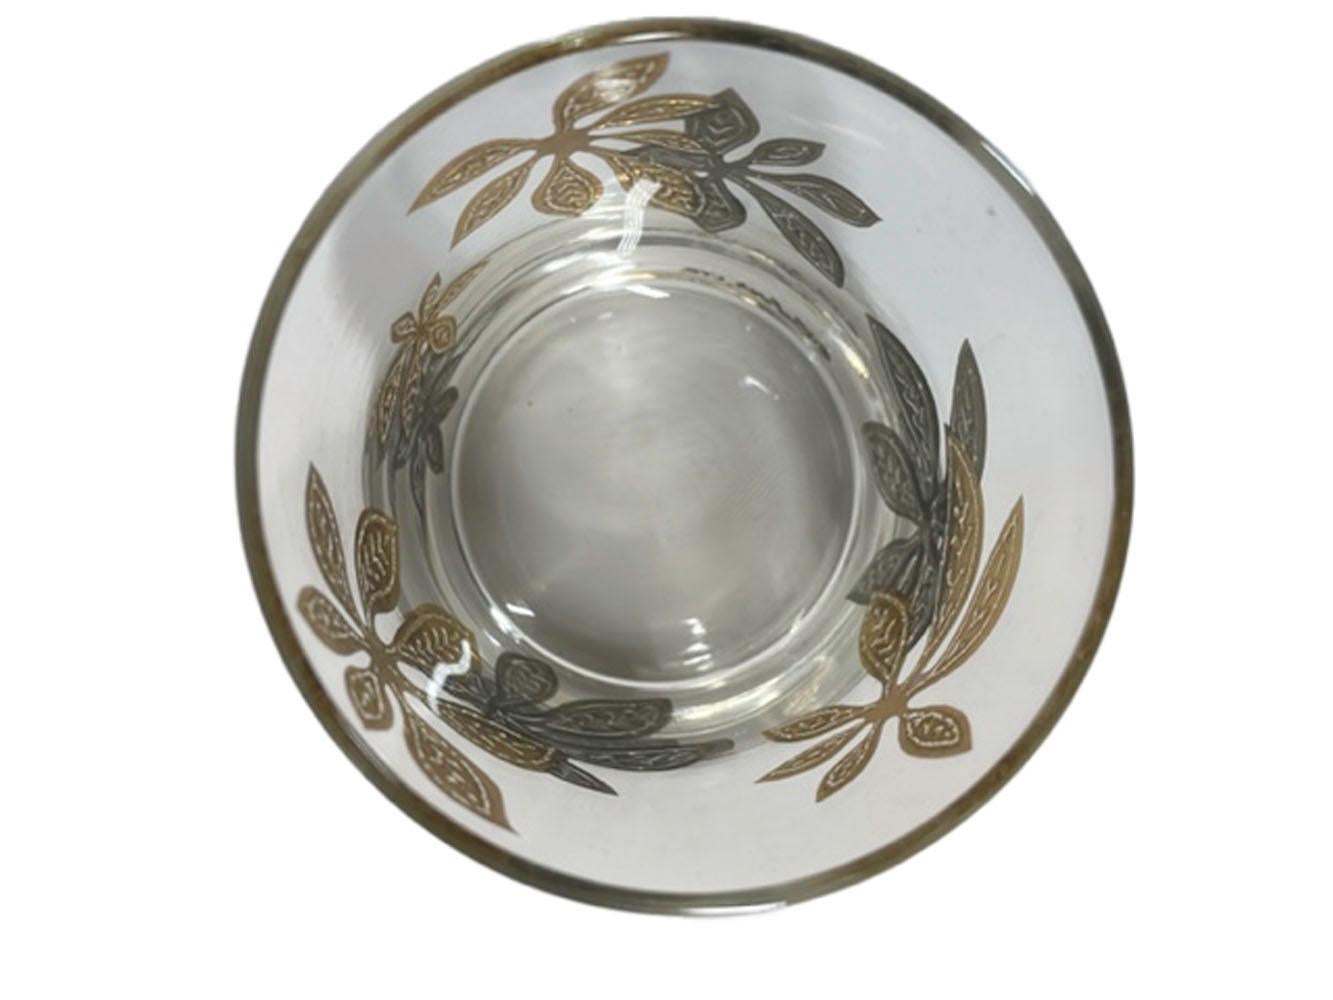 20th Century Mid-Century Modern Rocks Glasses by Culver, LTD. with Leaves in Gold and Silver For Sale